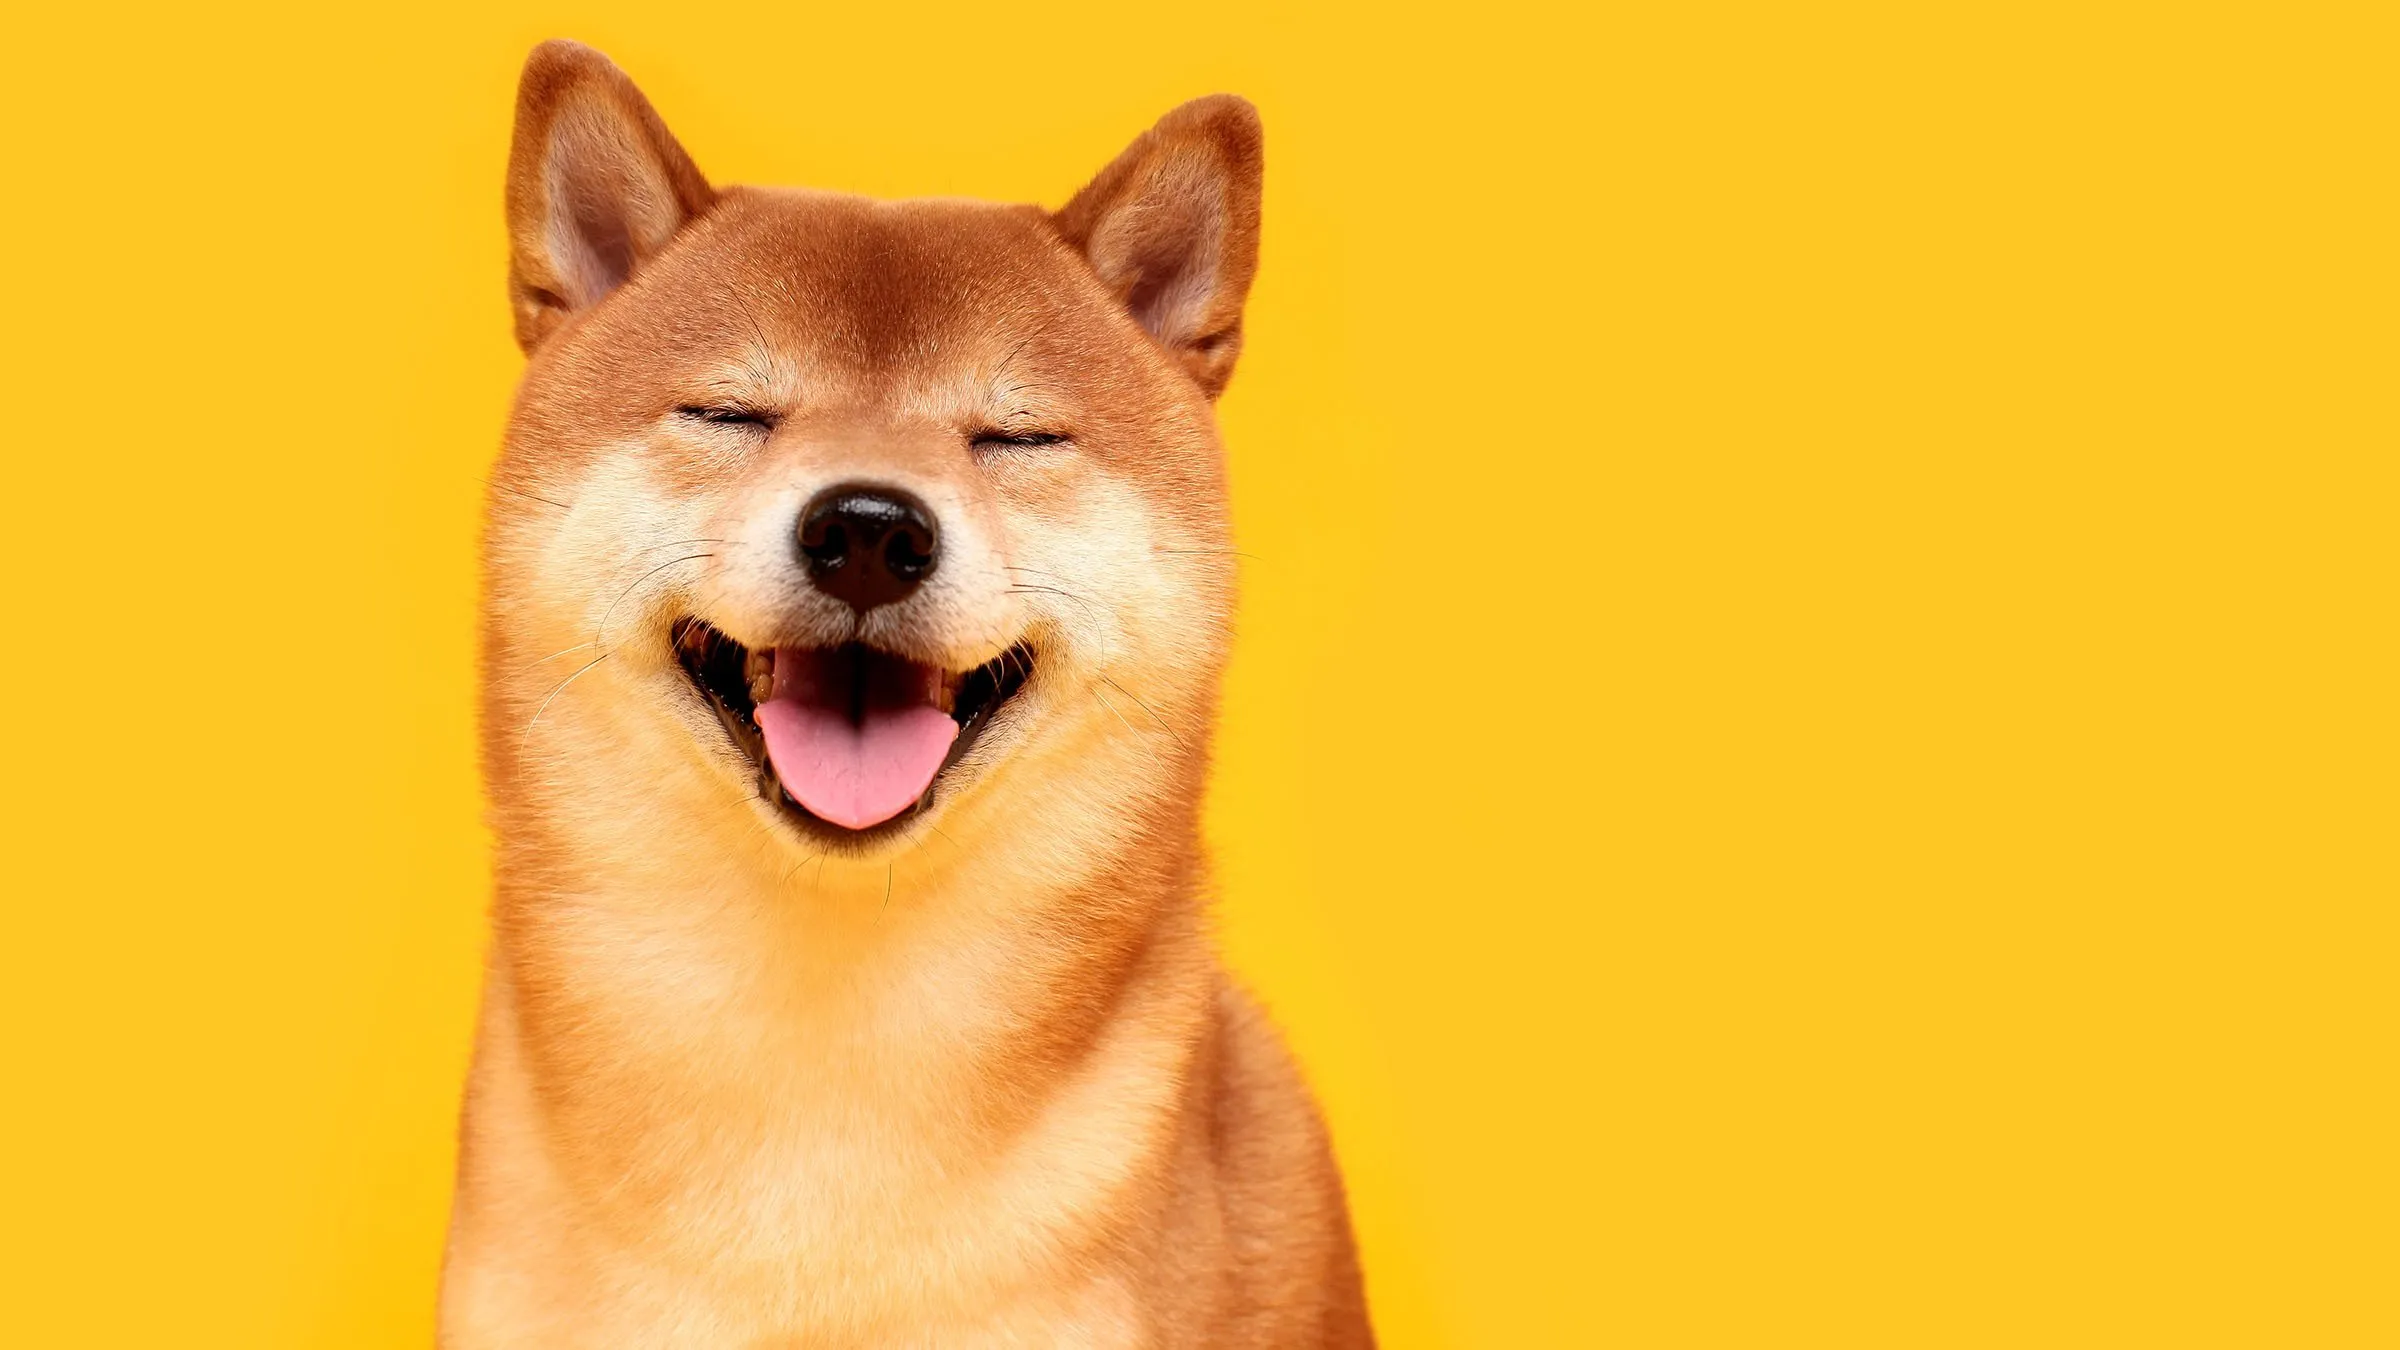 Ralph Lauren Now Accepts Shiba Inu at Miami Store